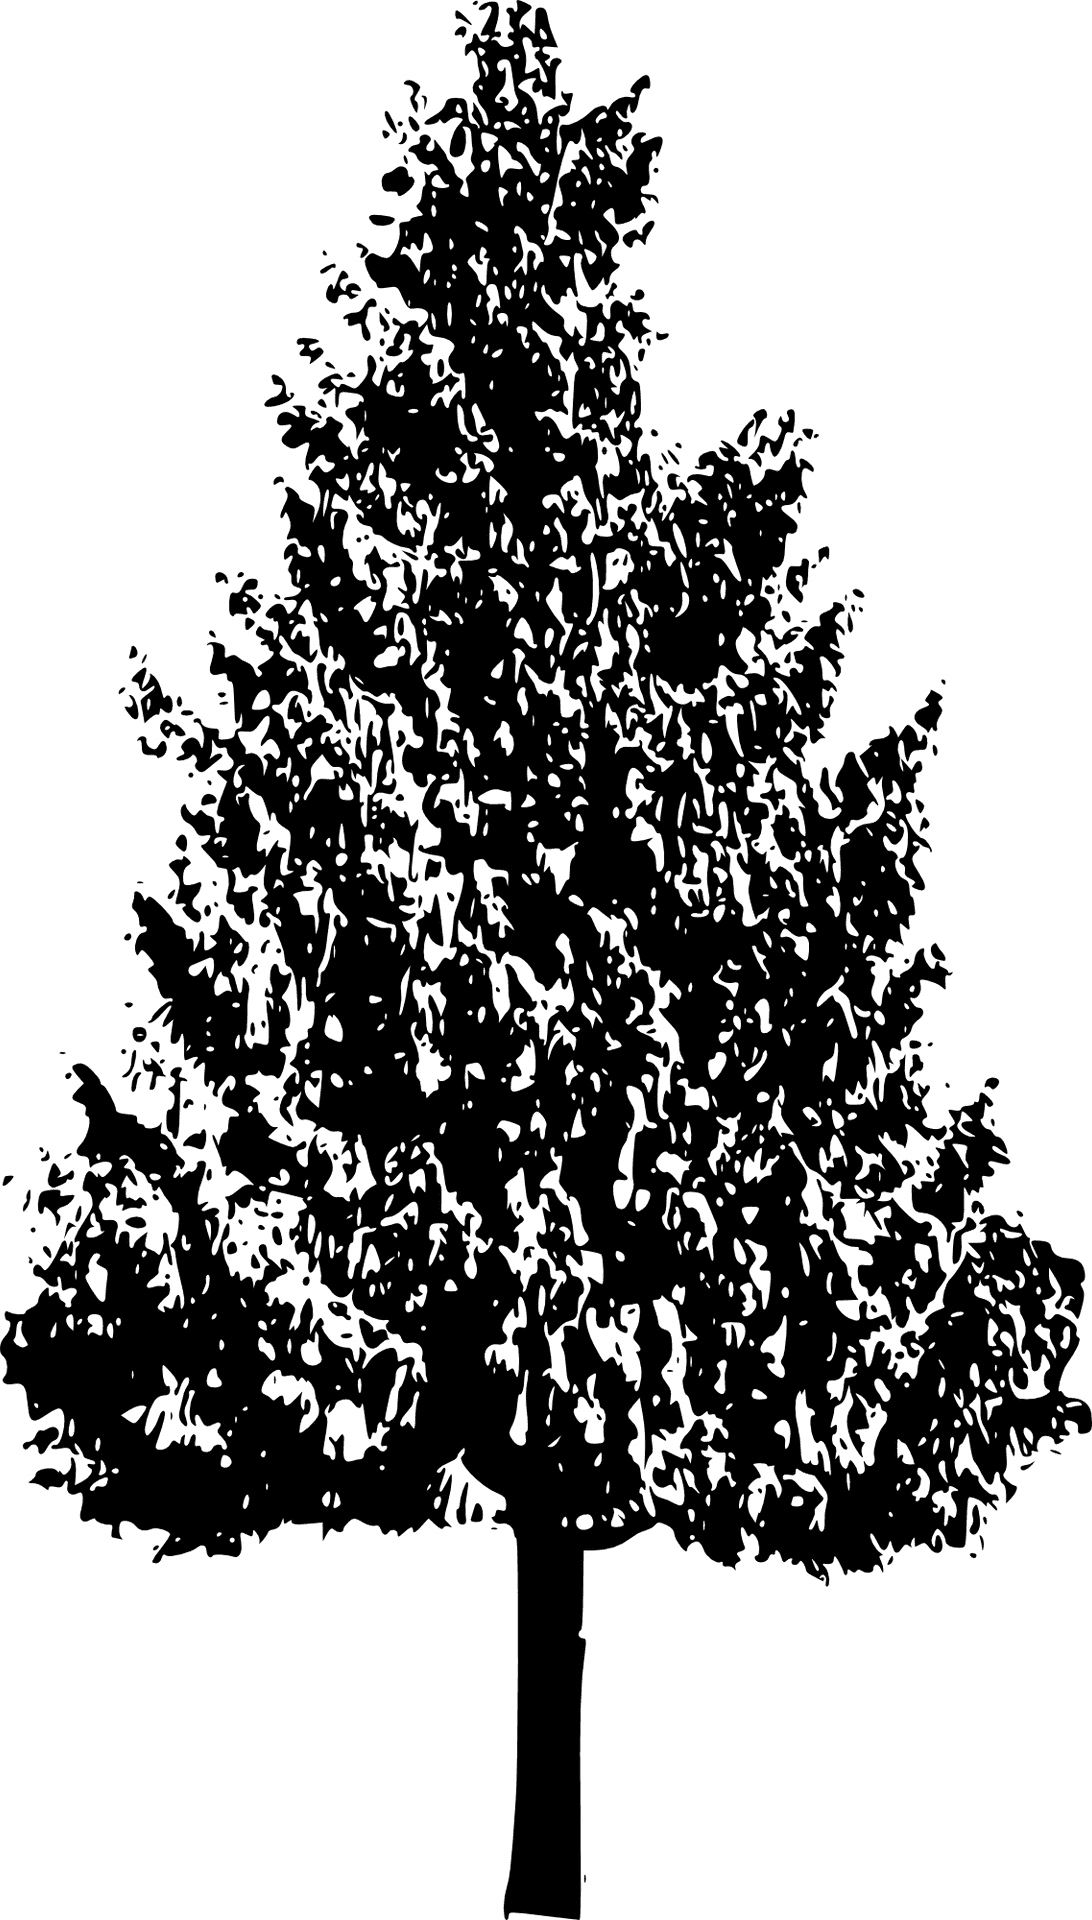 Pine Tree Silhouette Graphic PNG image